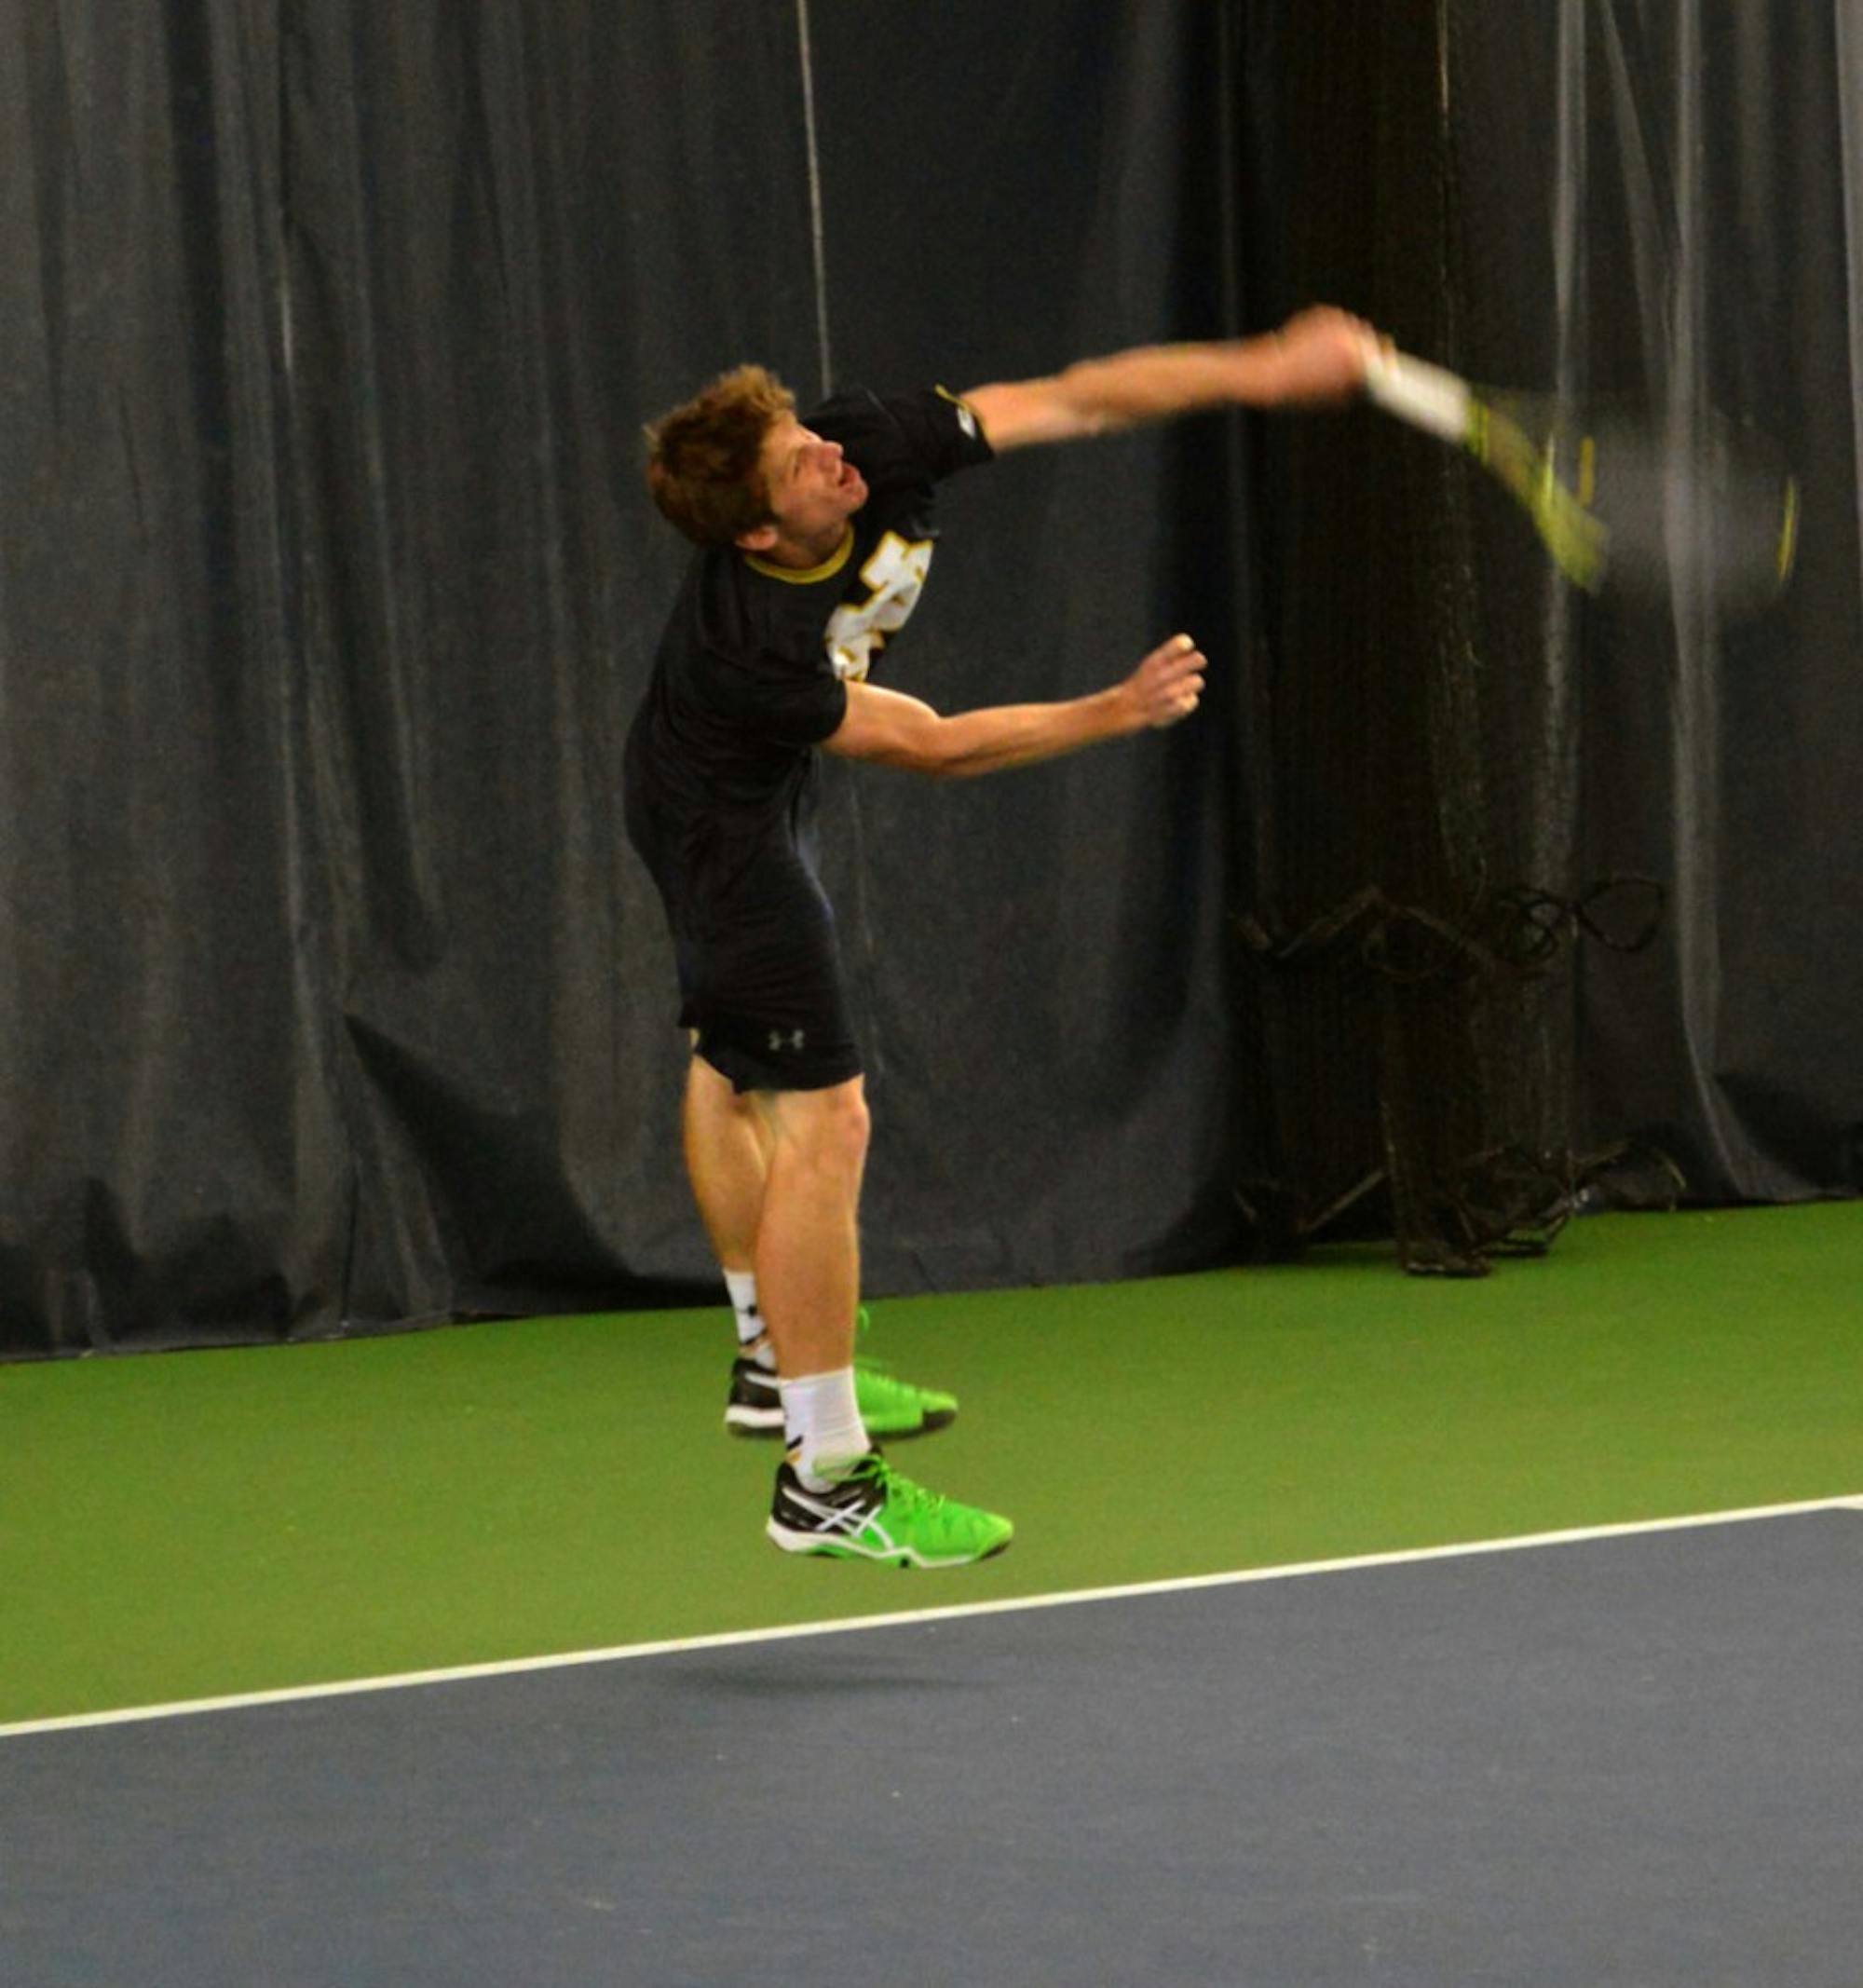 Irish senior Alex Lawson serves during Notre Dame’s 5-2 victory over Duke at Eck Tennis Pavilion on March 18. Lawson held a 13-16 record overall and a 5-6 record in the ACC for the 2015-2016 season.